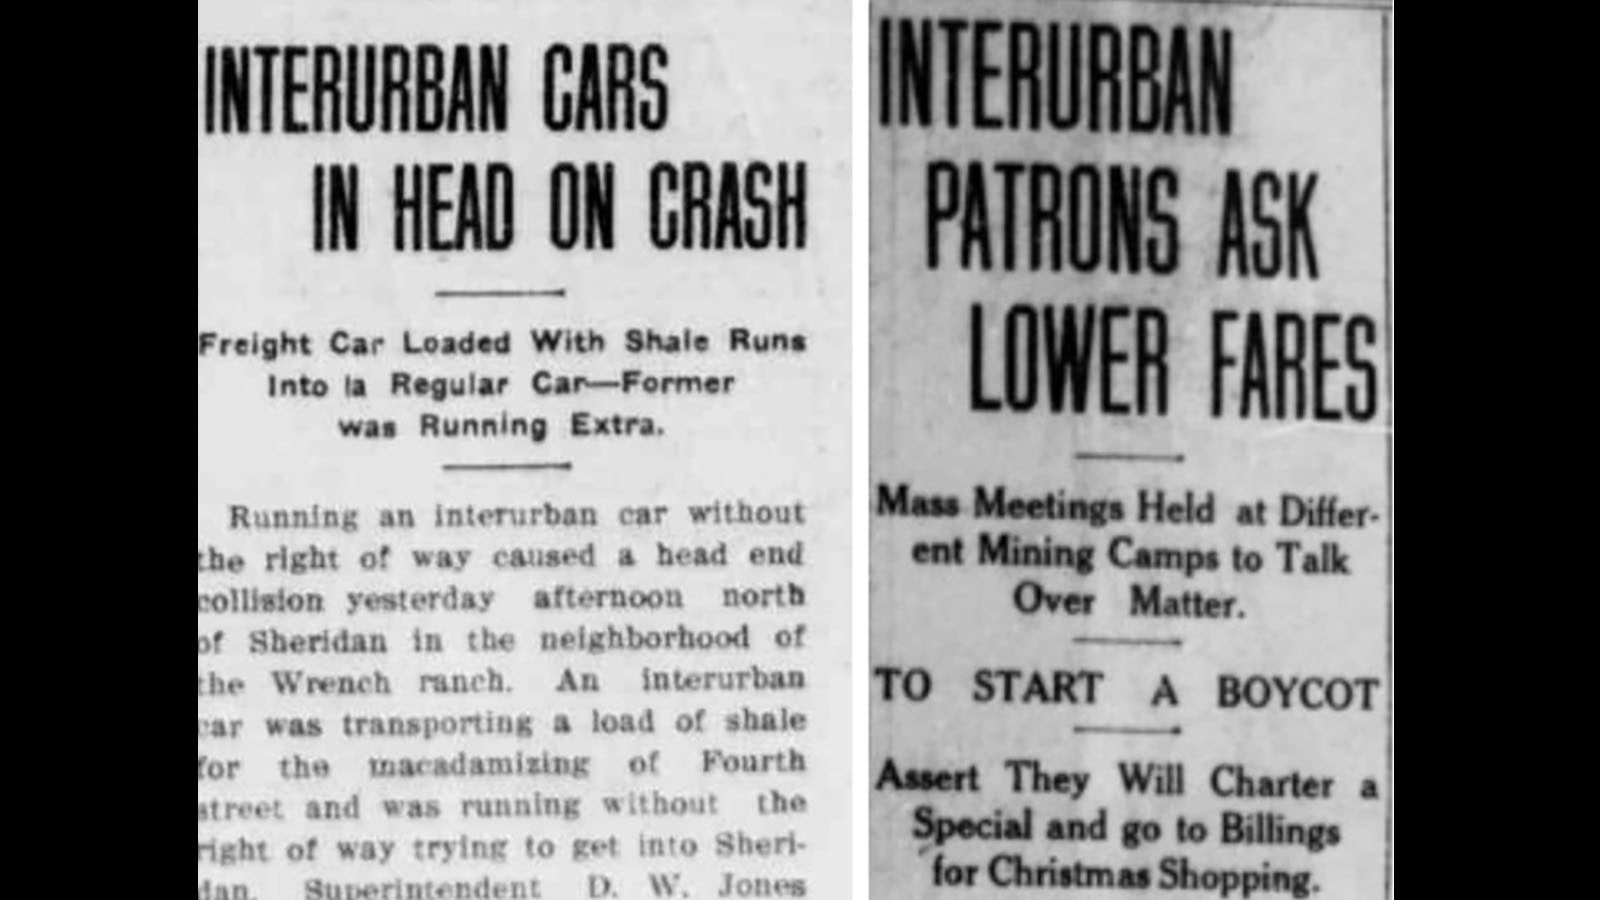 The trolley company’s superintendent was at the controls for a head-on crash in 1912, as shown in this newspaper headline from the time, left. At right, coal mining communities demanded lower fares or else in November 2012.